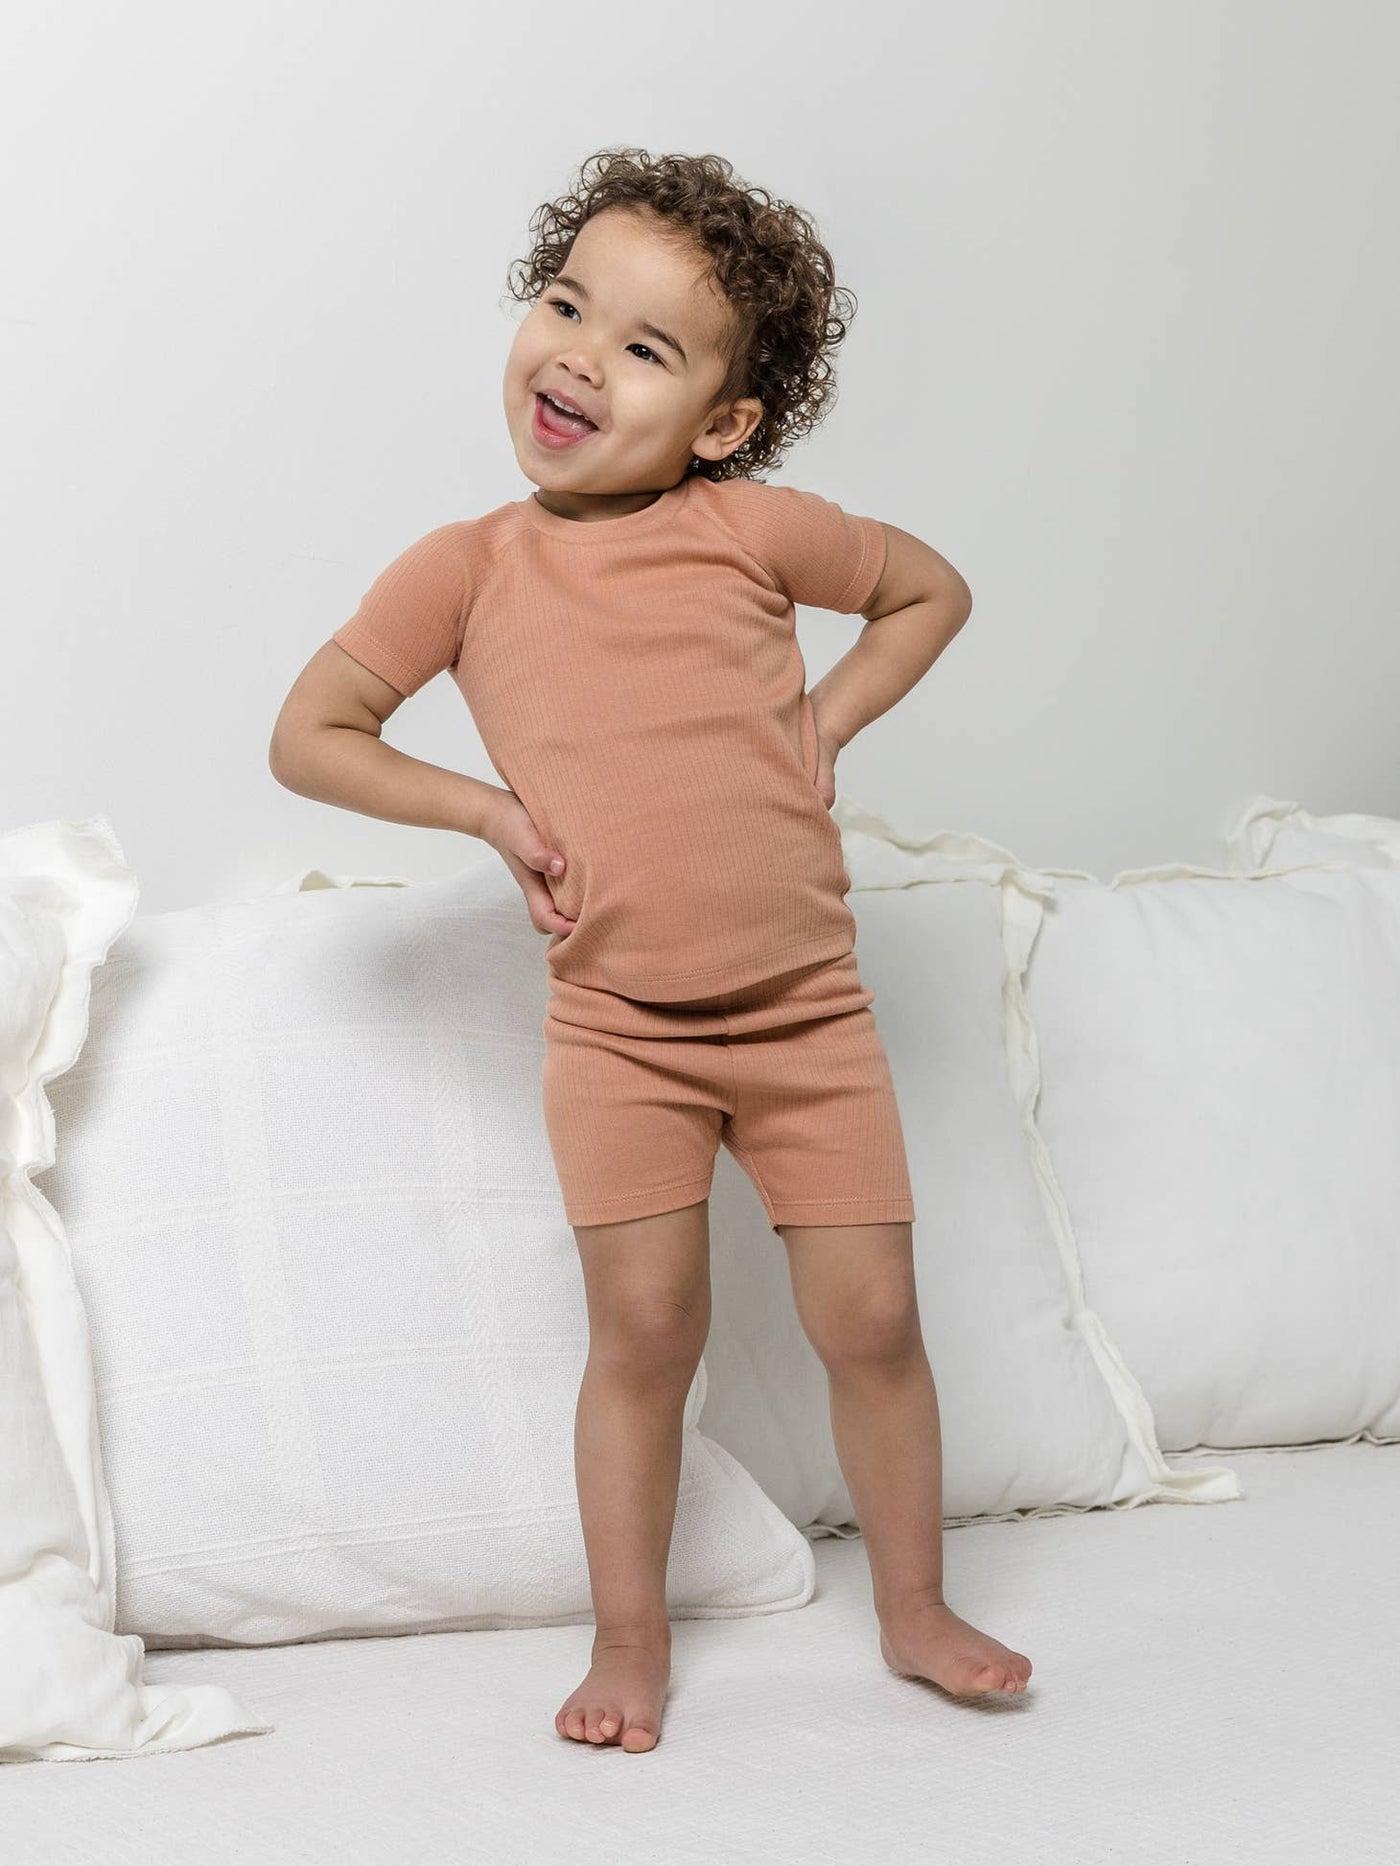 Organic Baby and Kids Ribbed Short Sleeve Jammies